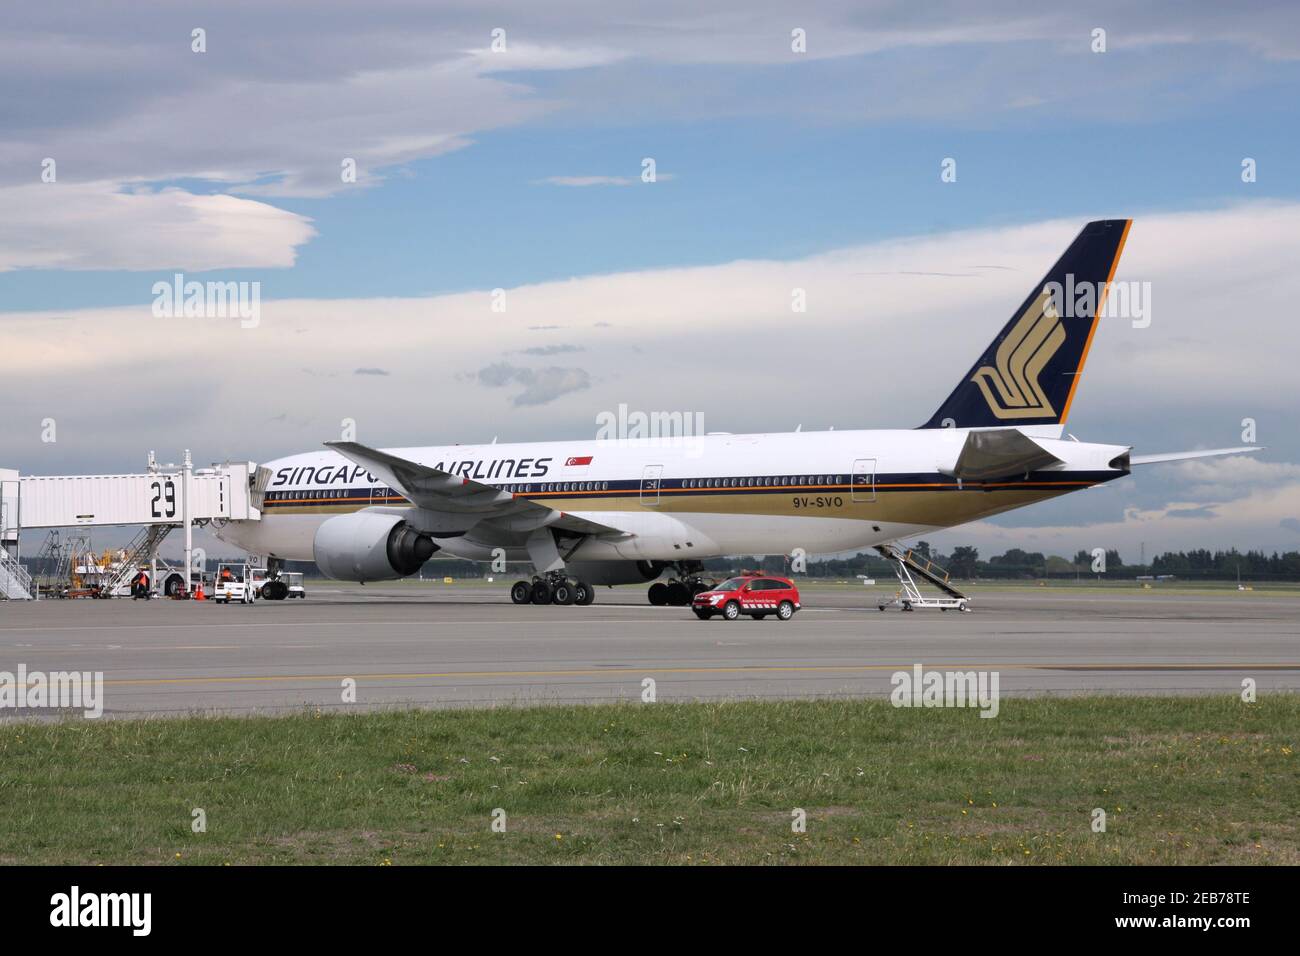 NEW ZEALAND - MARCH 17: Singapore Airlines Boeing 777 on March 18, 2009 at Christchurch International Airport. B777 series is notable for safety. No f Stock Photo